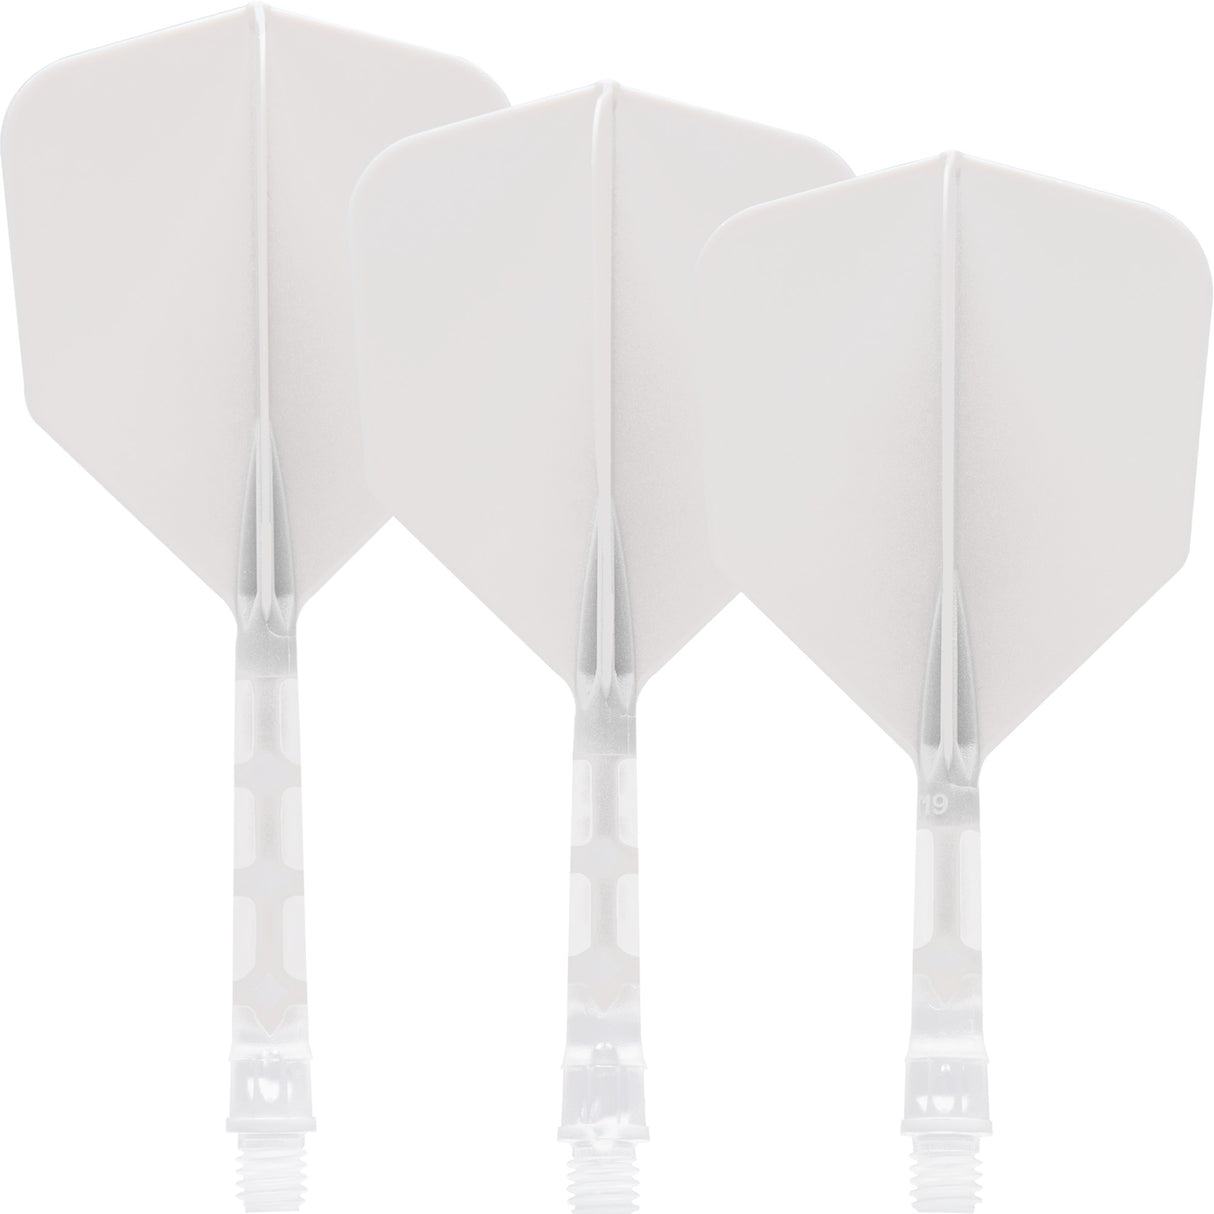 *Cuesoul Rost T19 Integrated Dart Shaft and Flights - Big Wing - Clear with White Flight